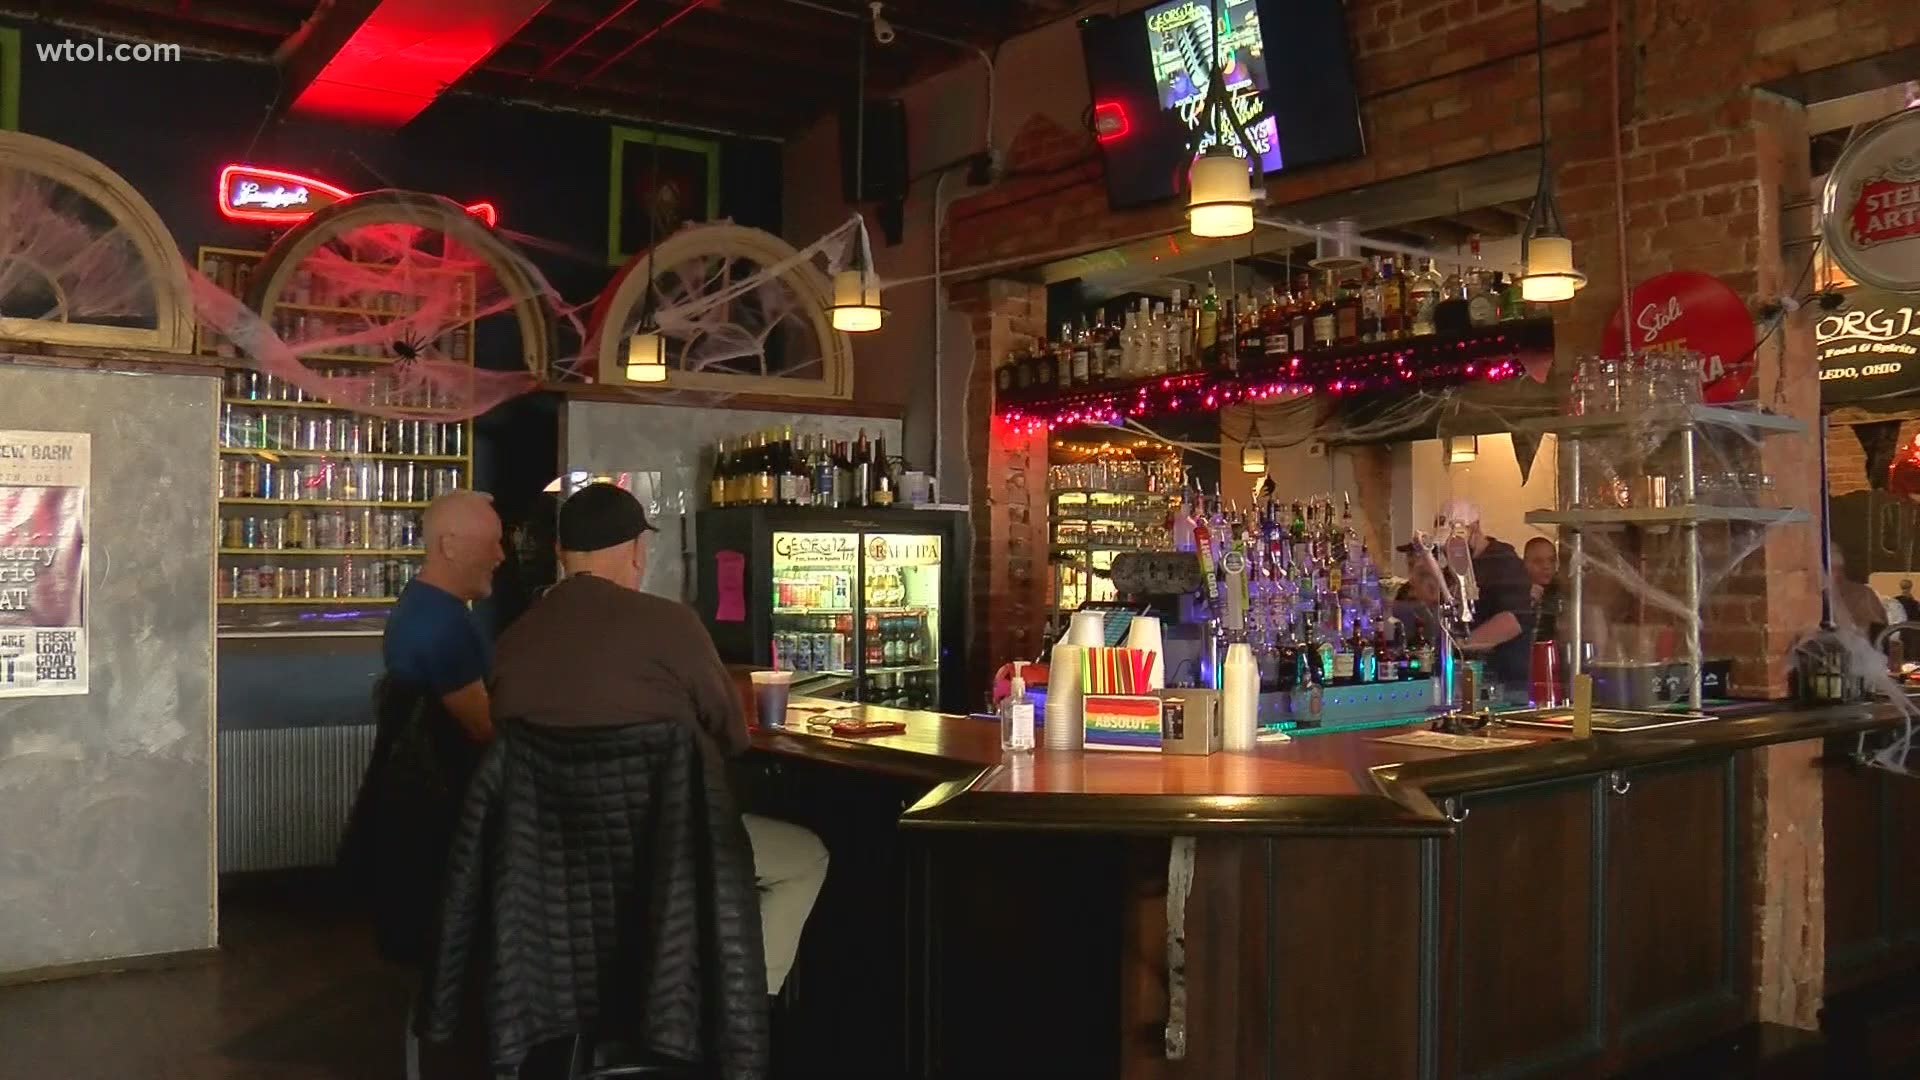 Businesses say they are struggling to keep their doors open since they can only serve alcohol until 10 p.m.